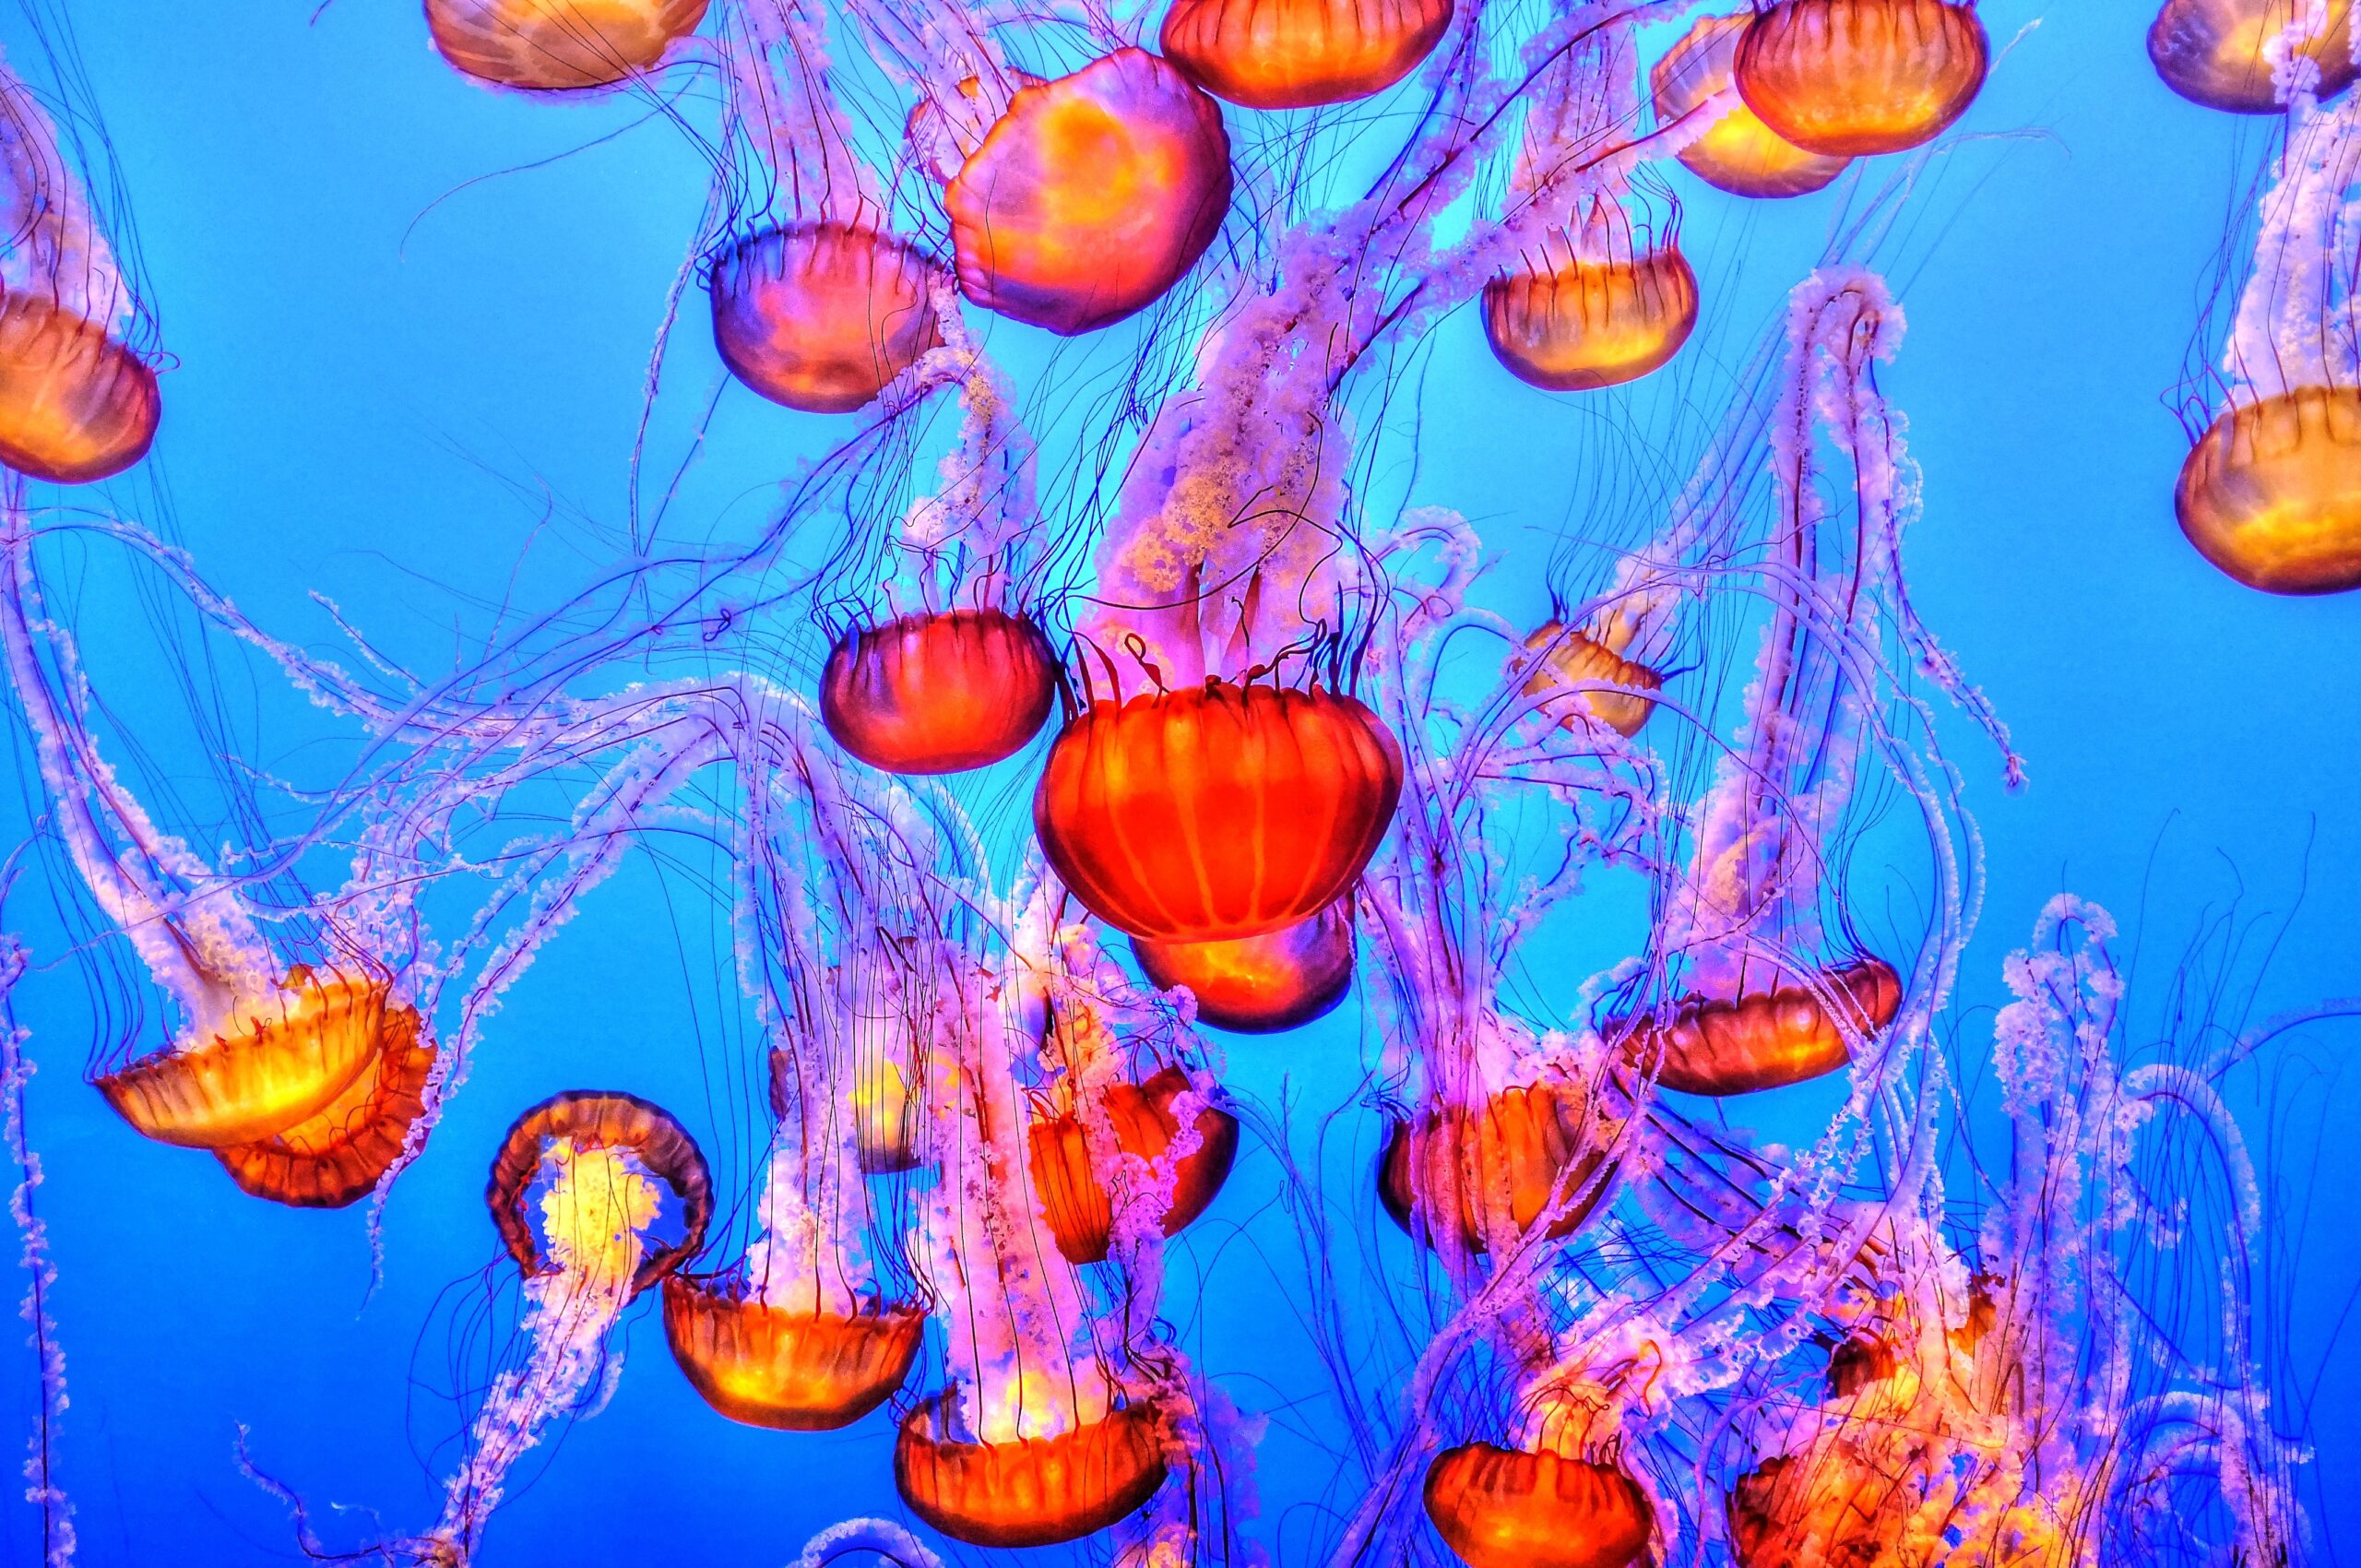 A large group of red and orange jellyfish floating in blue water.